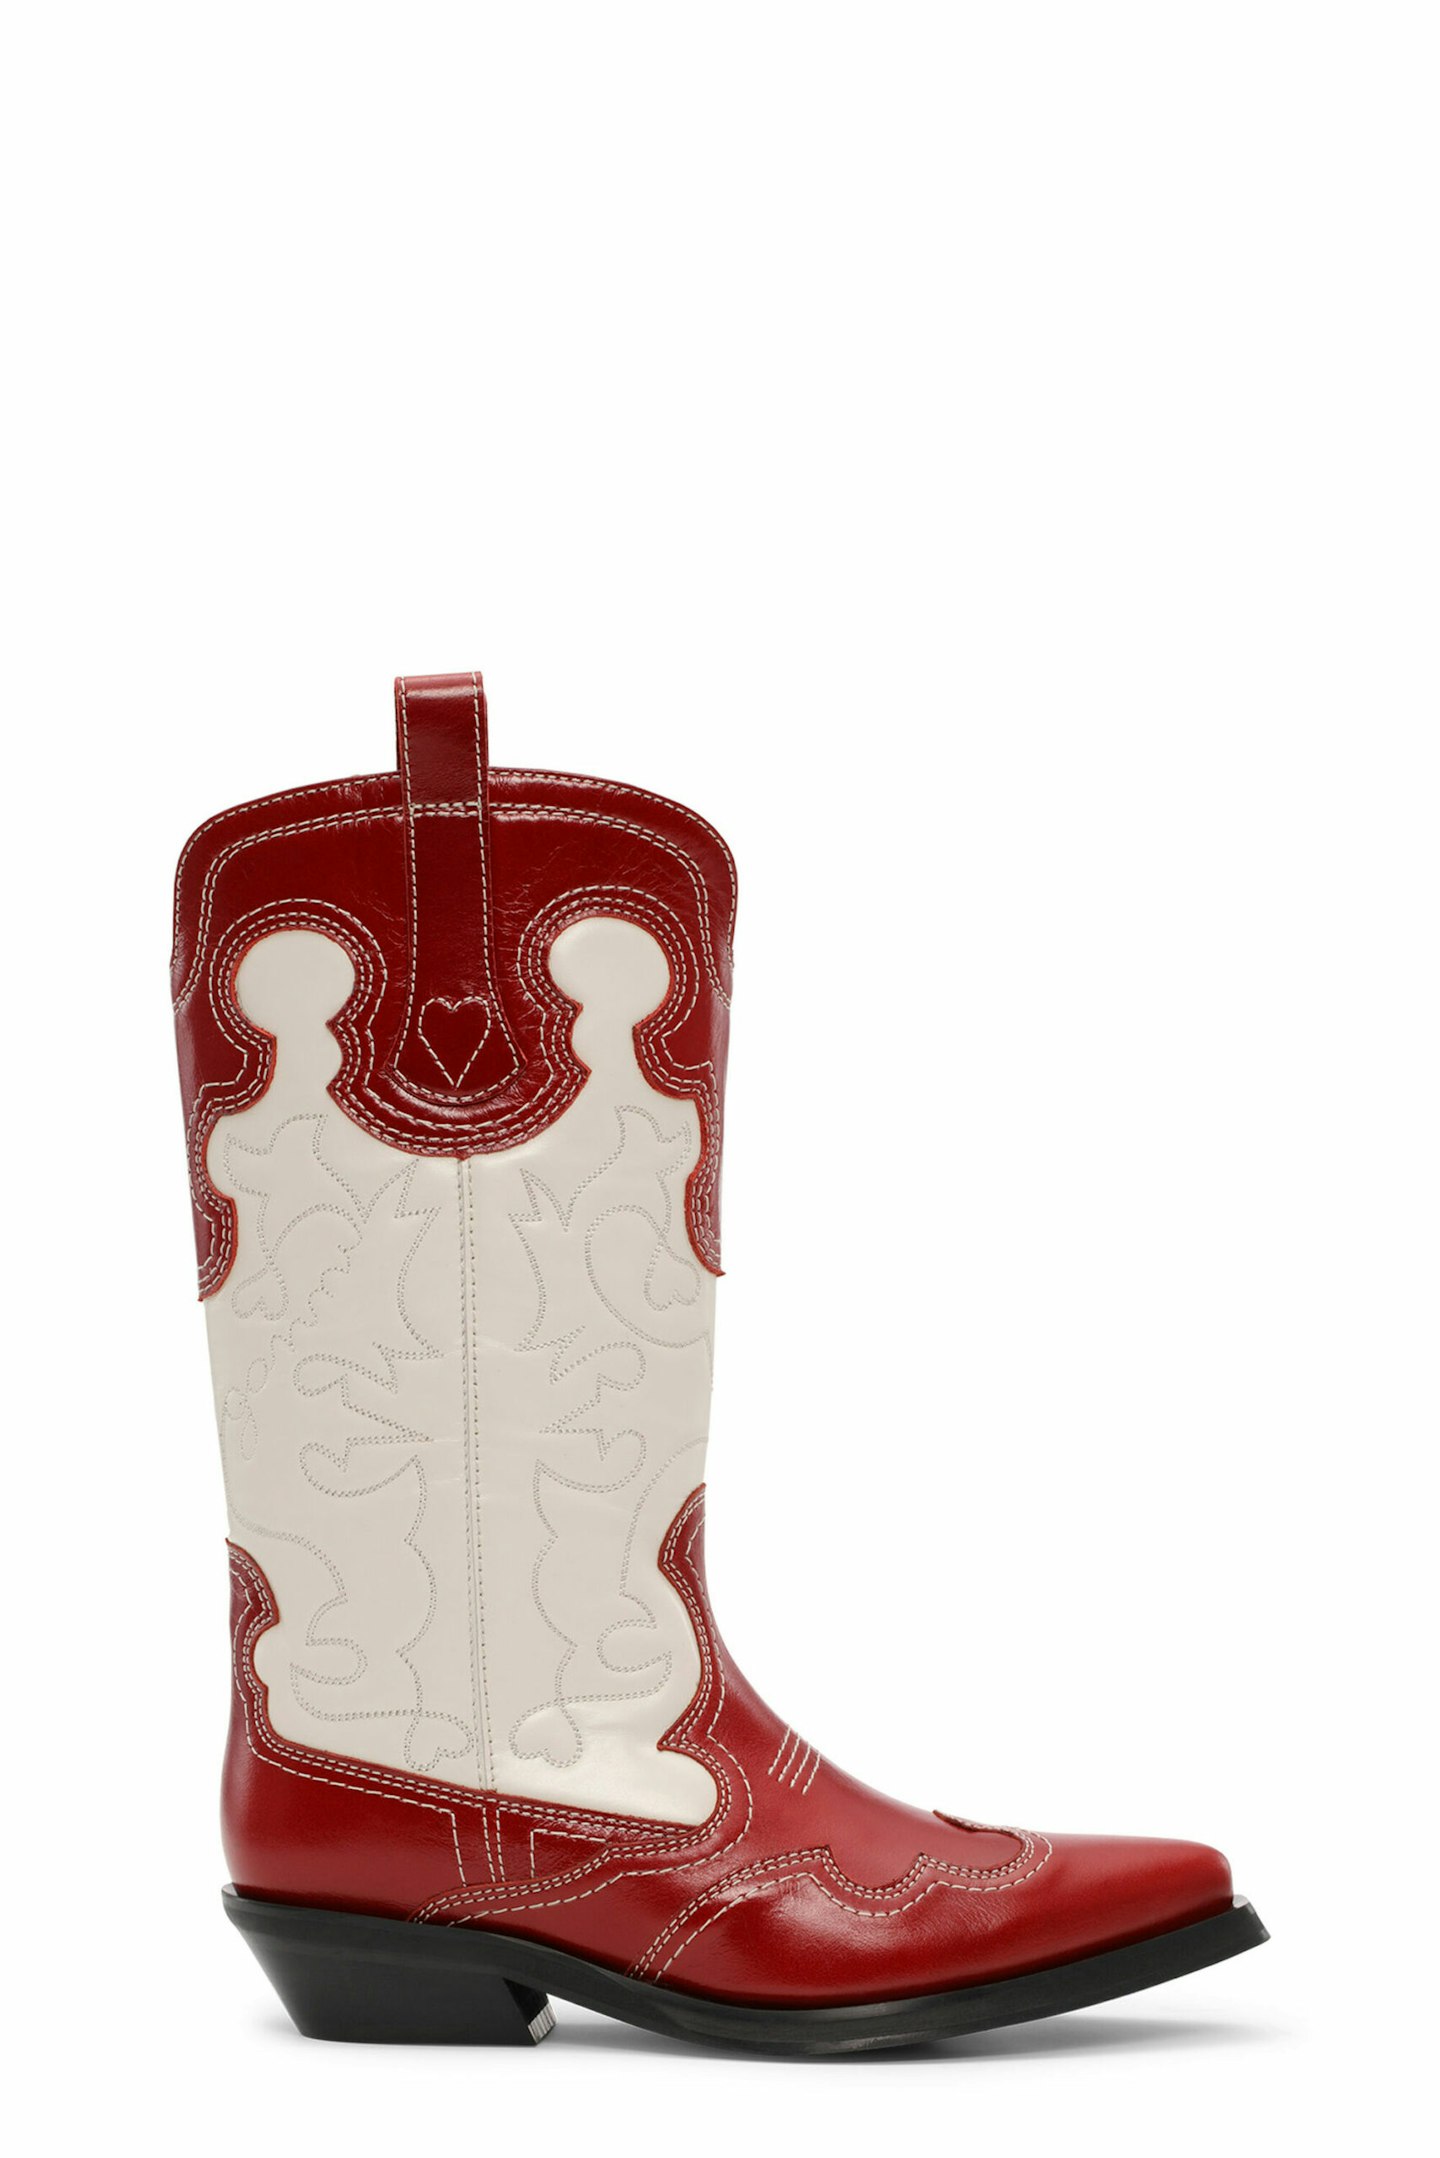 Ganni, Red/White Embroidered Western Boots